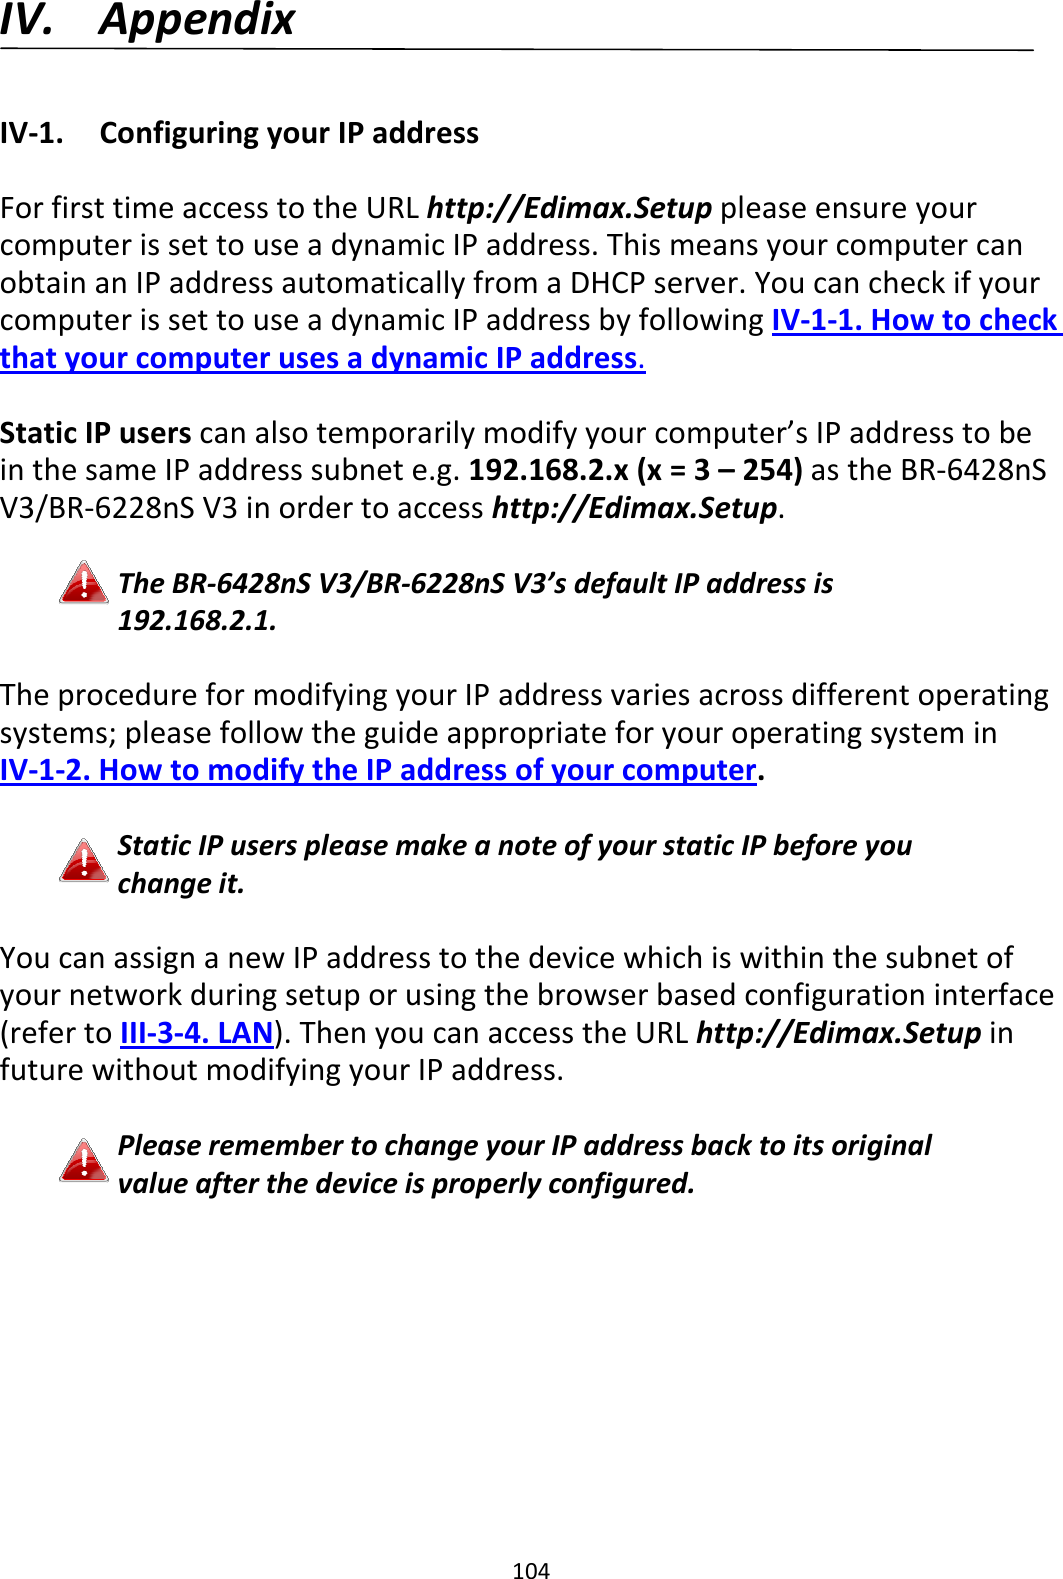 104 IV. Appendix  IV-1.  Configuring your IP address  For first time access to the URL http://Edimax.Setup please ensure your computer is set to use a dynamic IP address. This means your computer can obtain an IP address automatically from a DHCP server. You can check if your computer is set to use a dynamic IP address by following IV-1-1. How to check that your computer uses a dynamic IP address.  Static IP users can also temporarily modify your computer’s IP address to be in the same IP address subnet e.g. 192.168.2.x (x = 3 – 254) as the BR-6428nS V3/BR-6228nS V3 in order to access http://Edimax.Setup.  The BR-6428nS V3/BR-6228nS V3’s default IP address is 192.168.2.1.  The procedure for modifying your IP address varies across different operating systems; please follow the guide appropriate for your operating system in IV-1-2. How to modify the IP address of your computer.  Static IP users please make a note of your static IP before you change it.  You can assign a new IP address to the device which is within the subnet of your network during setup or using the browser based configuration interface (refer to III-3-4. LAN). Then you can access the URL http://Edimax.Setup in future without modifying your IP address.  Please remember to change your IP address back to its original value after the device is properly configured.  